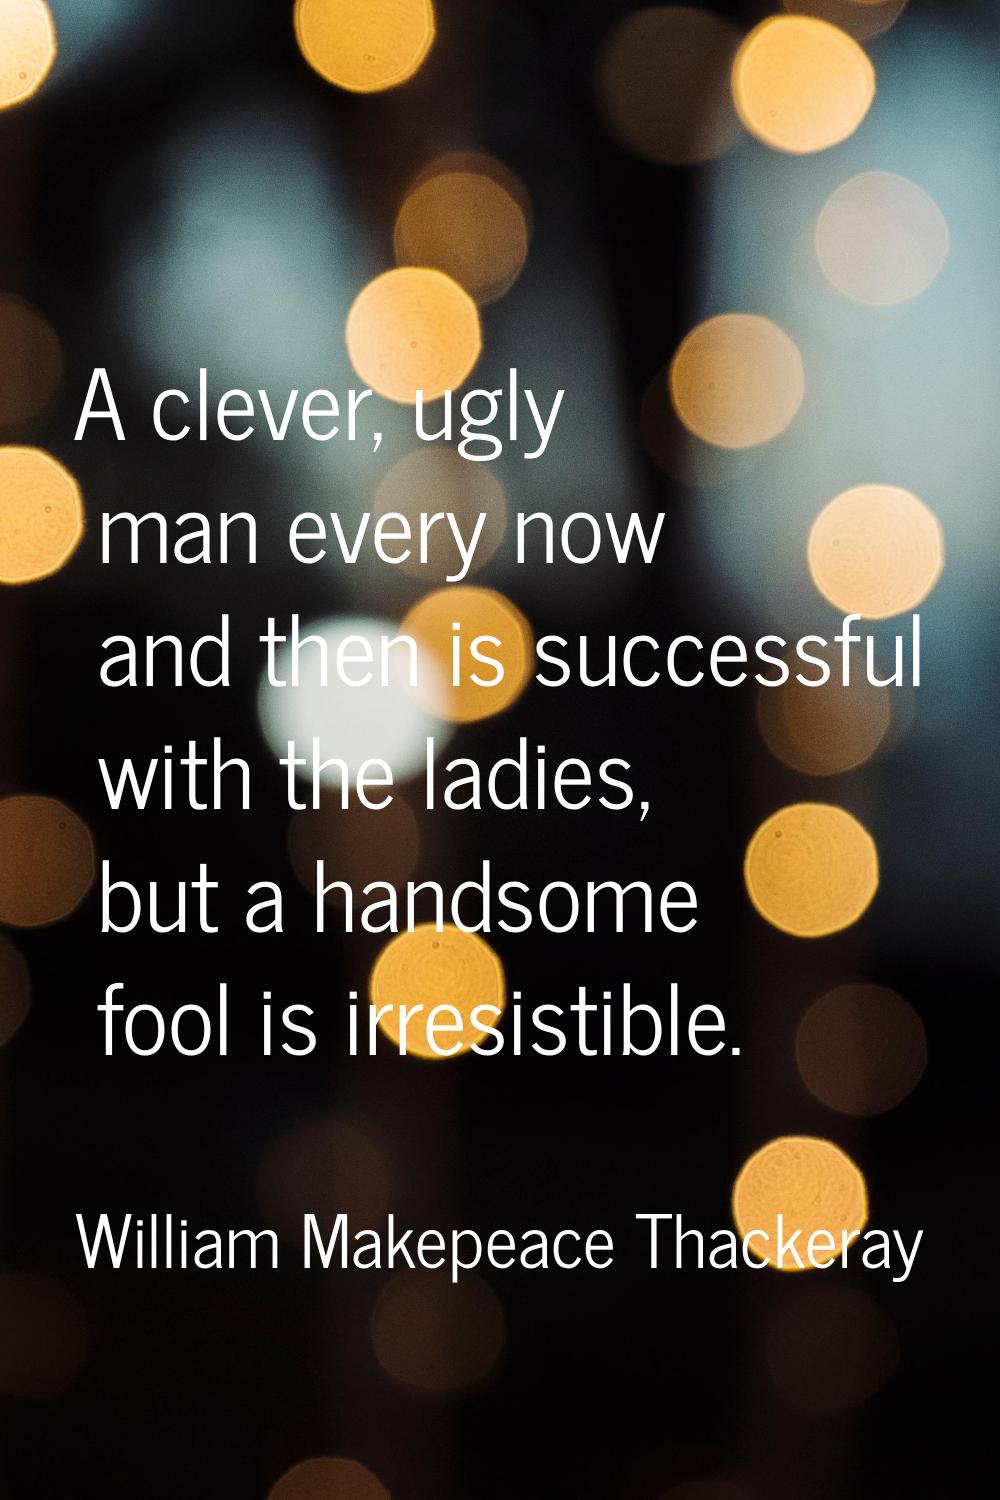 A clever, ugly man every now and then is successful with the ladies, but a handsome fool is irresis